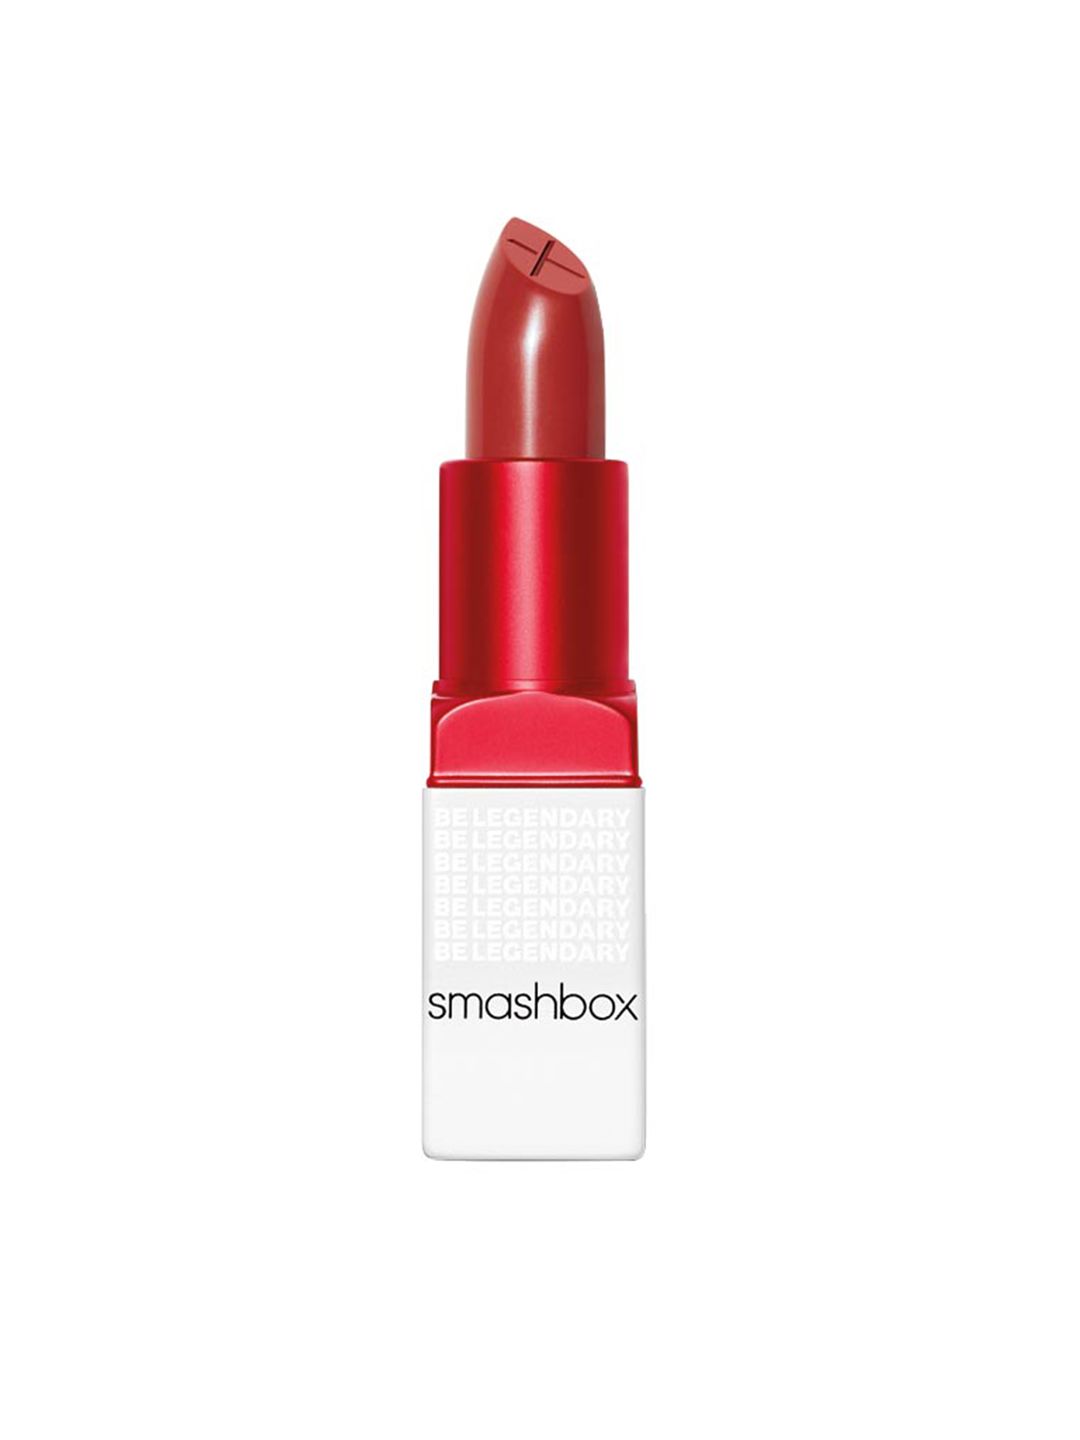 Smashbox Be Legendary Prime & Plush Lipstick- First Time Price in India